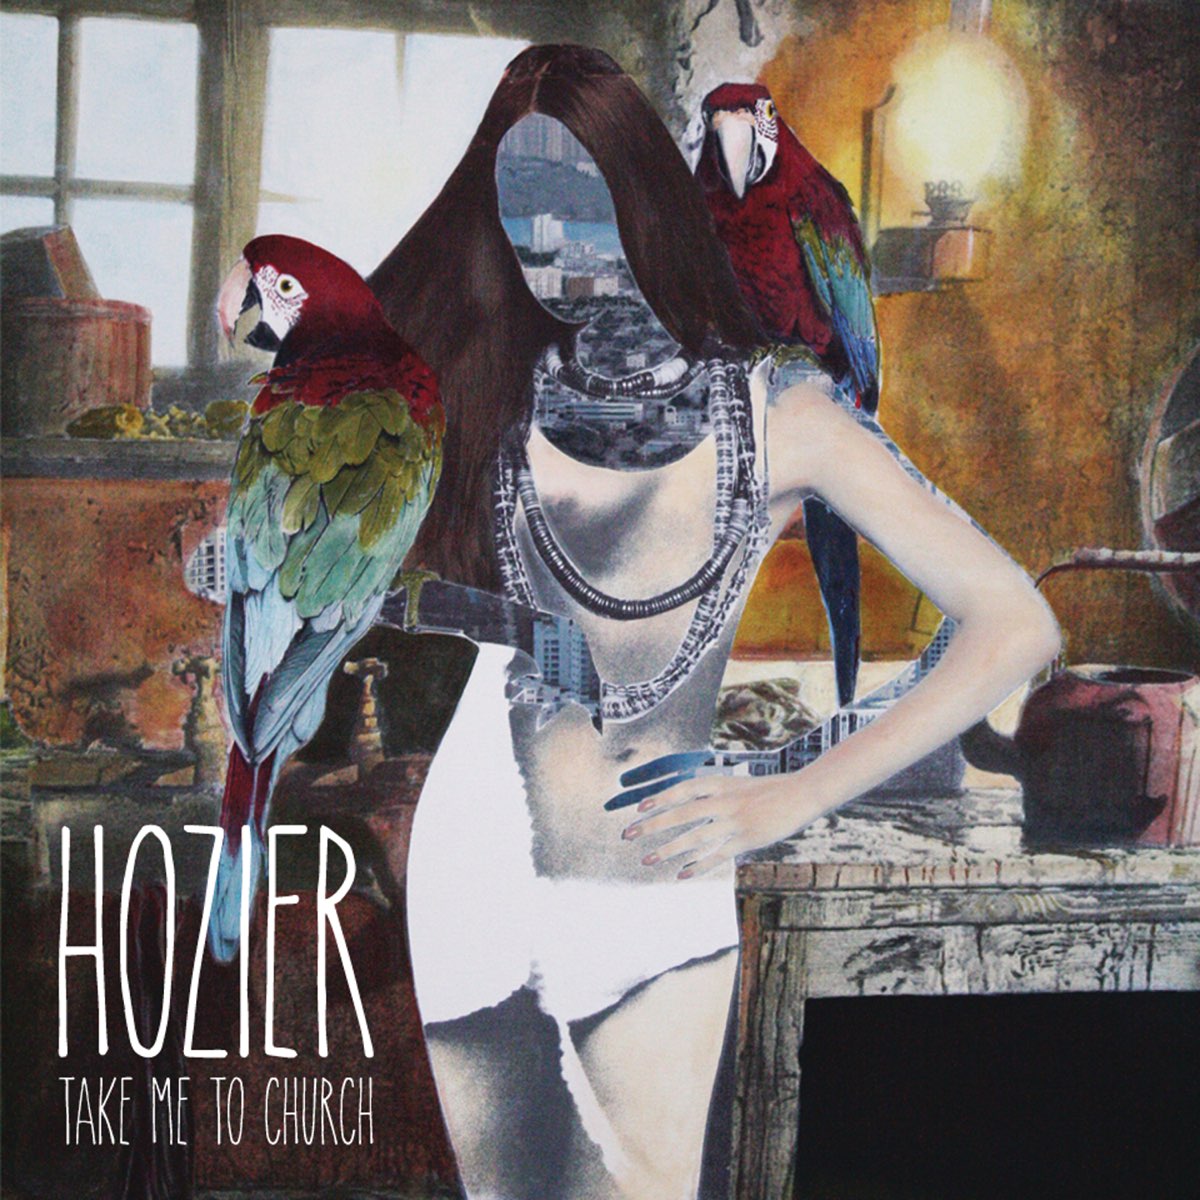 Take Me to Church - EP by Hozier on Apple Music